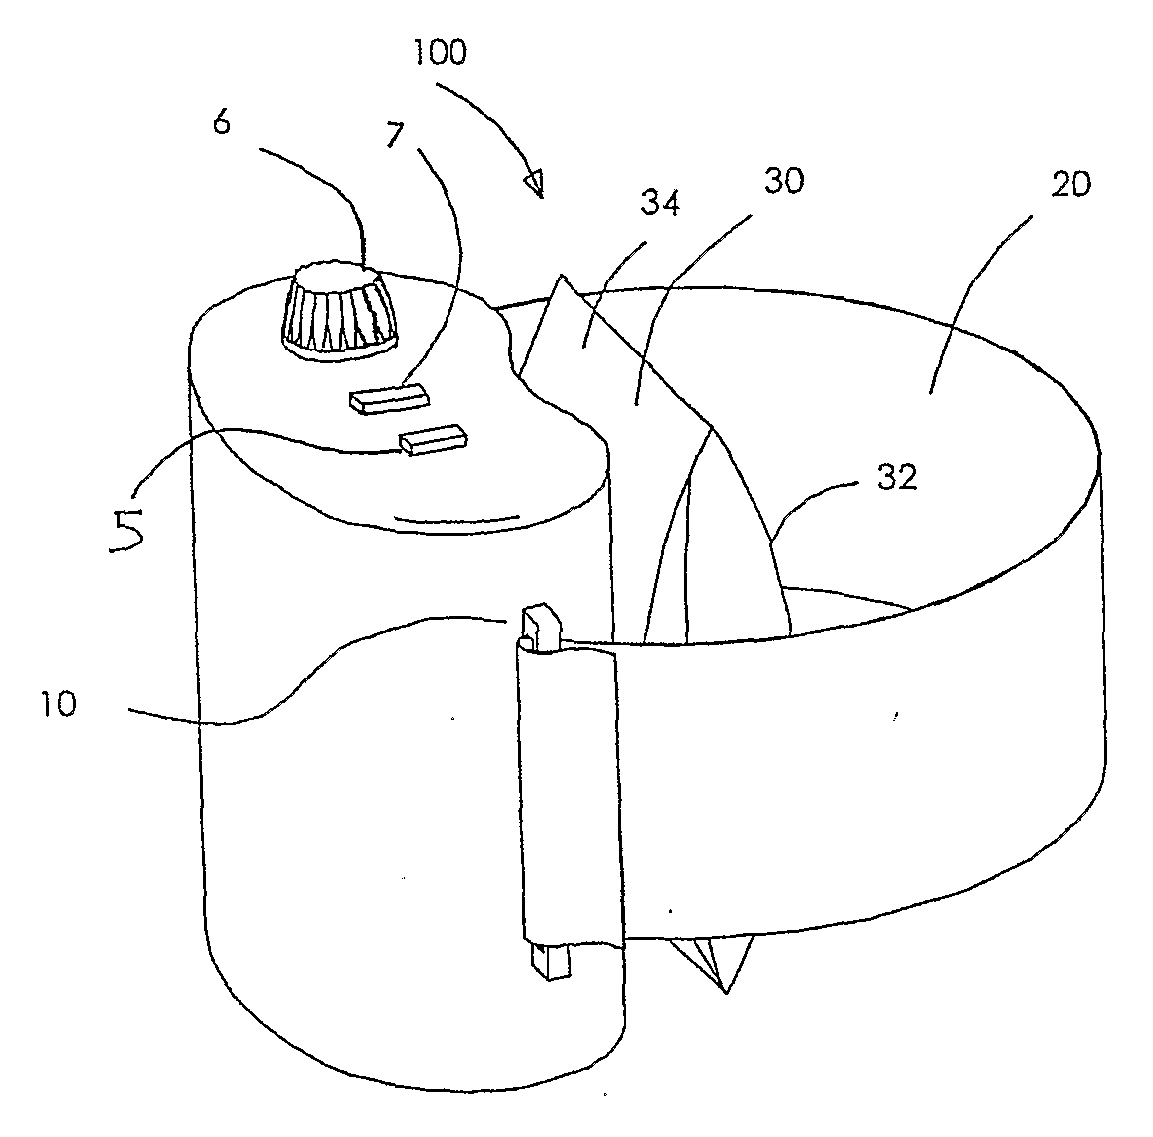 Portable Device for the Enhancement of Circulation